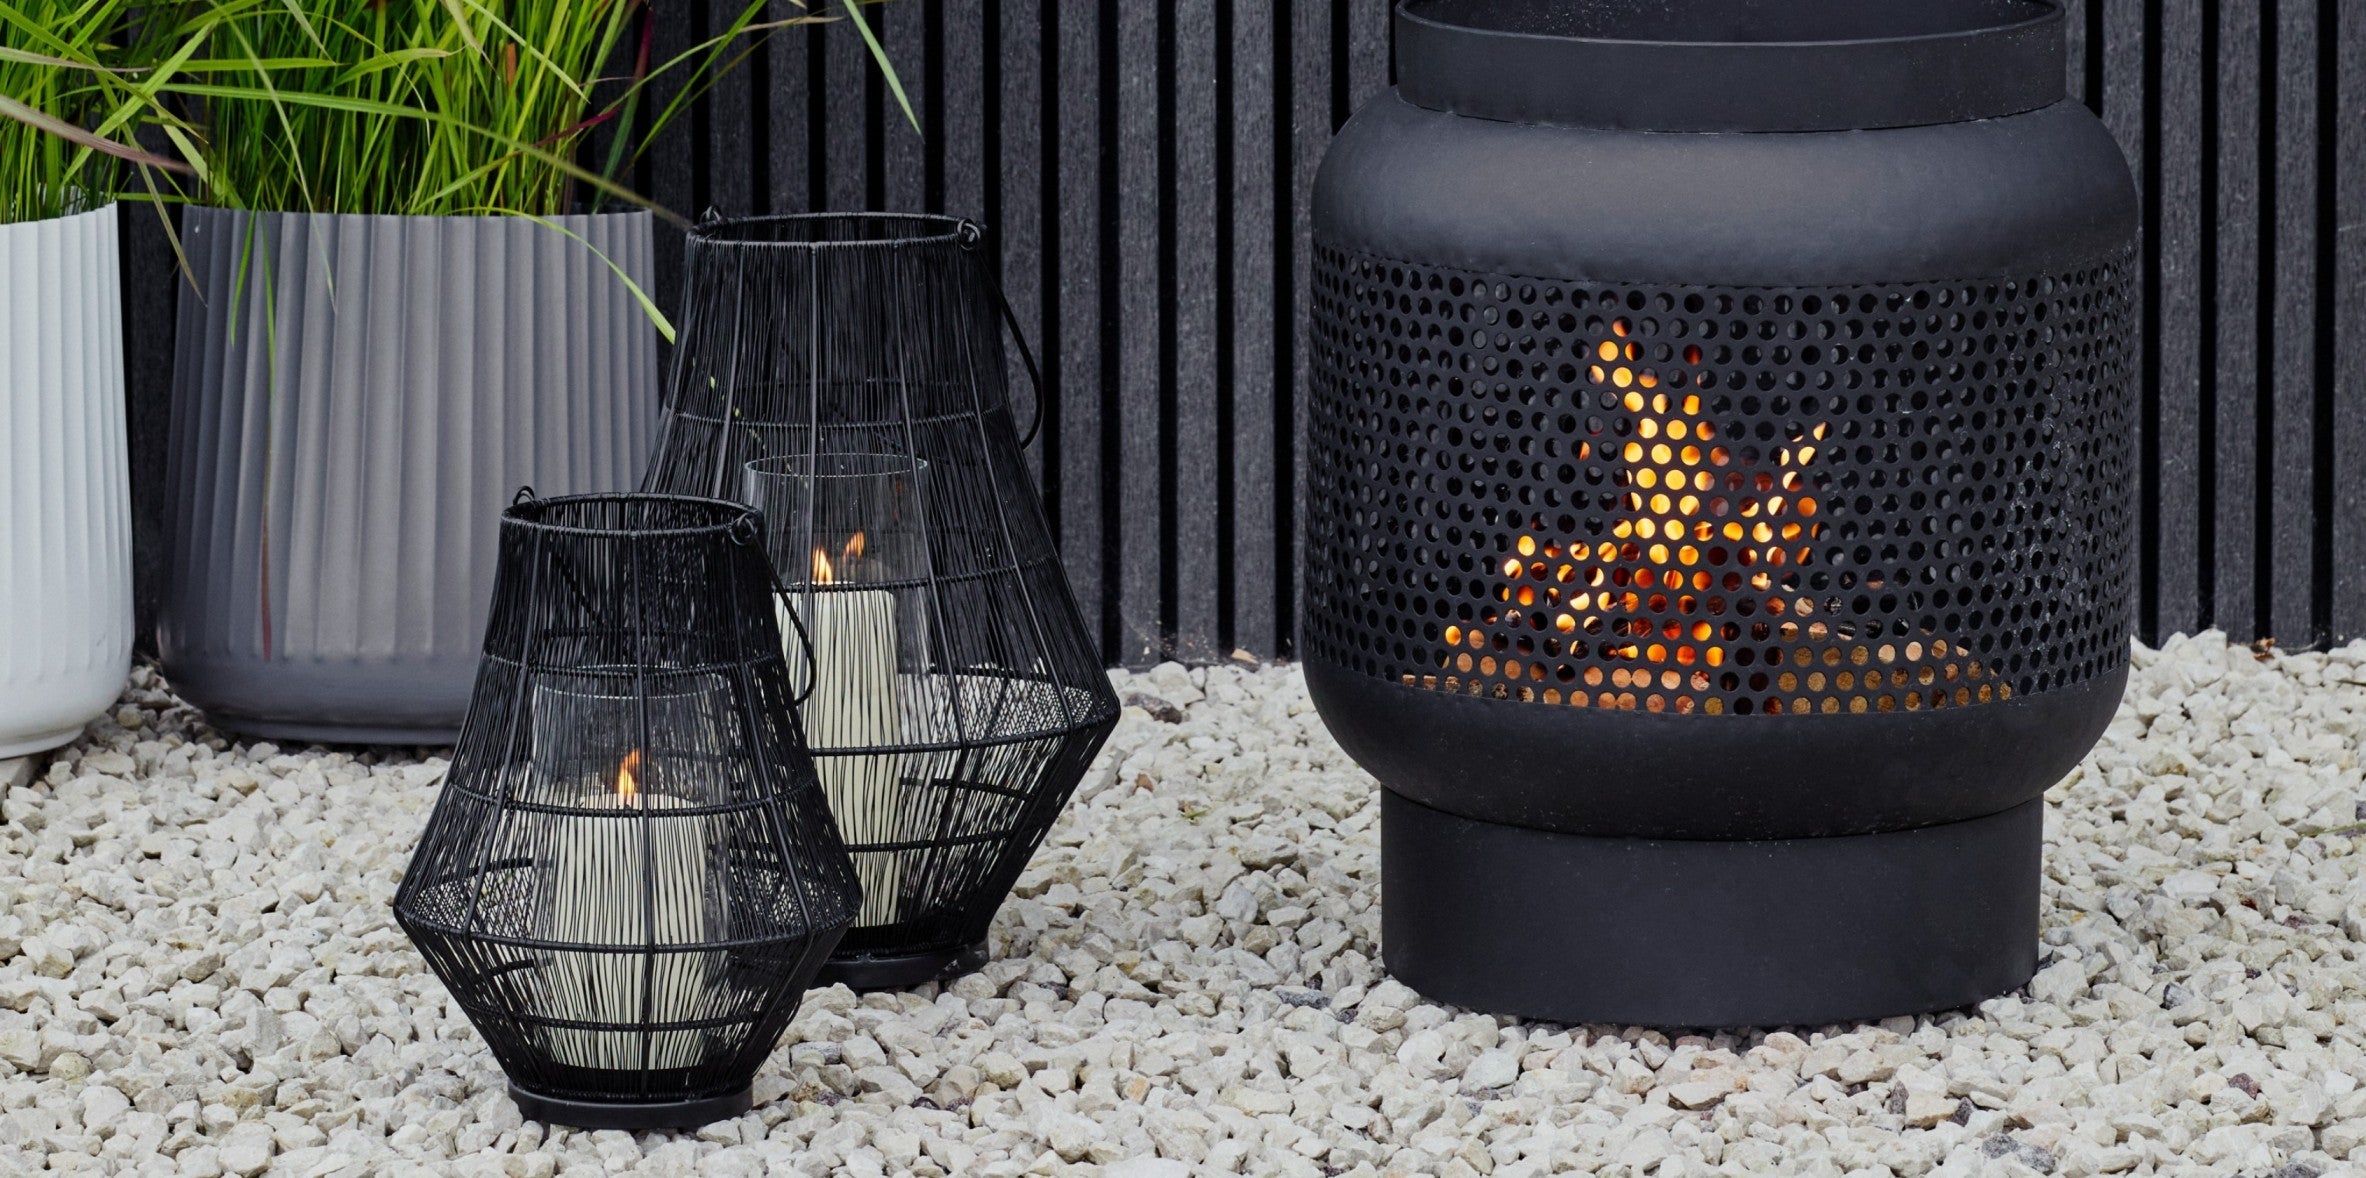 Ivyline outdoor lanterns can be used to transform your outdoor space